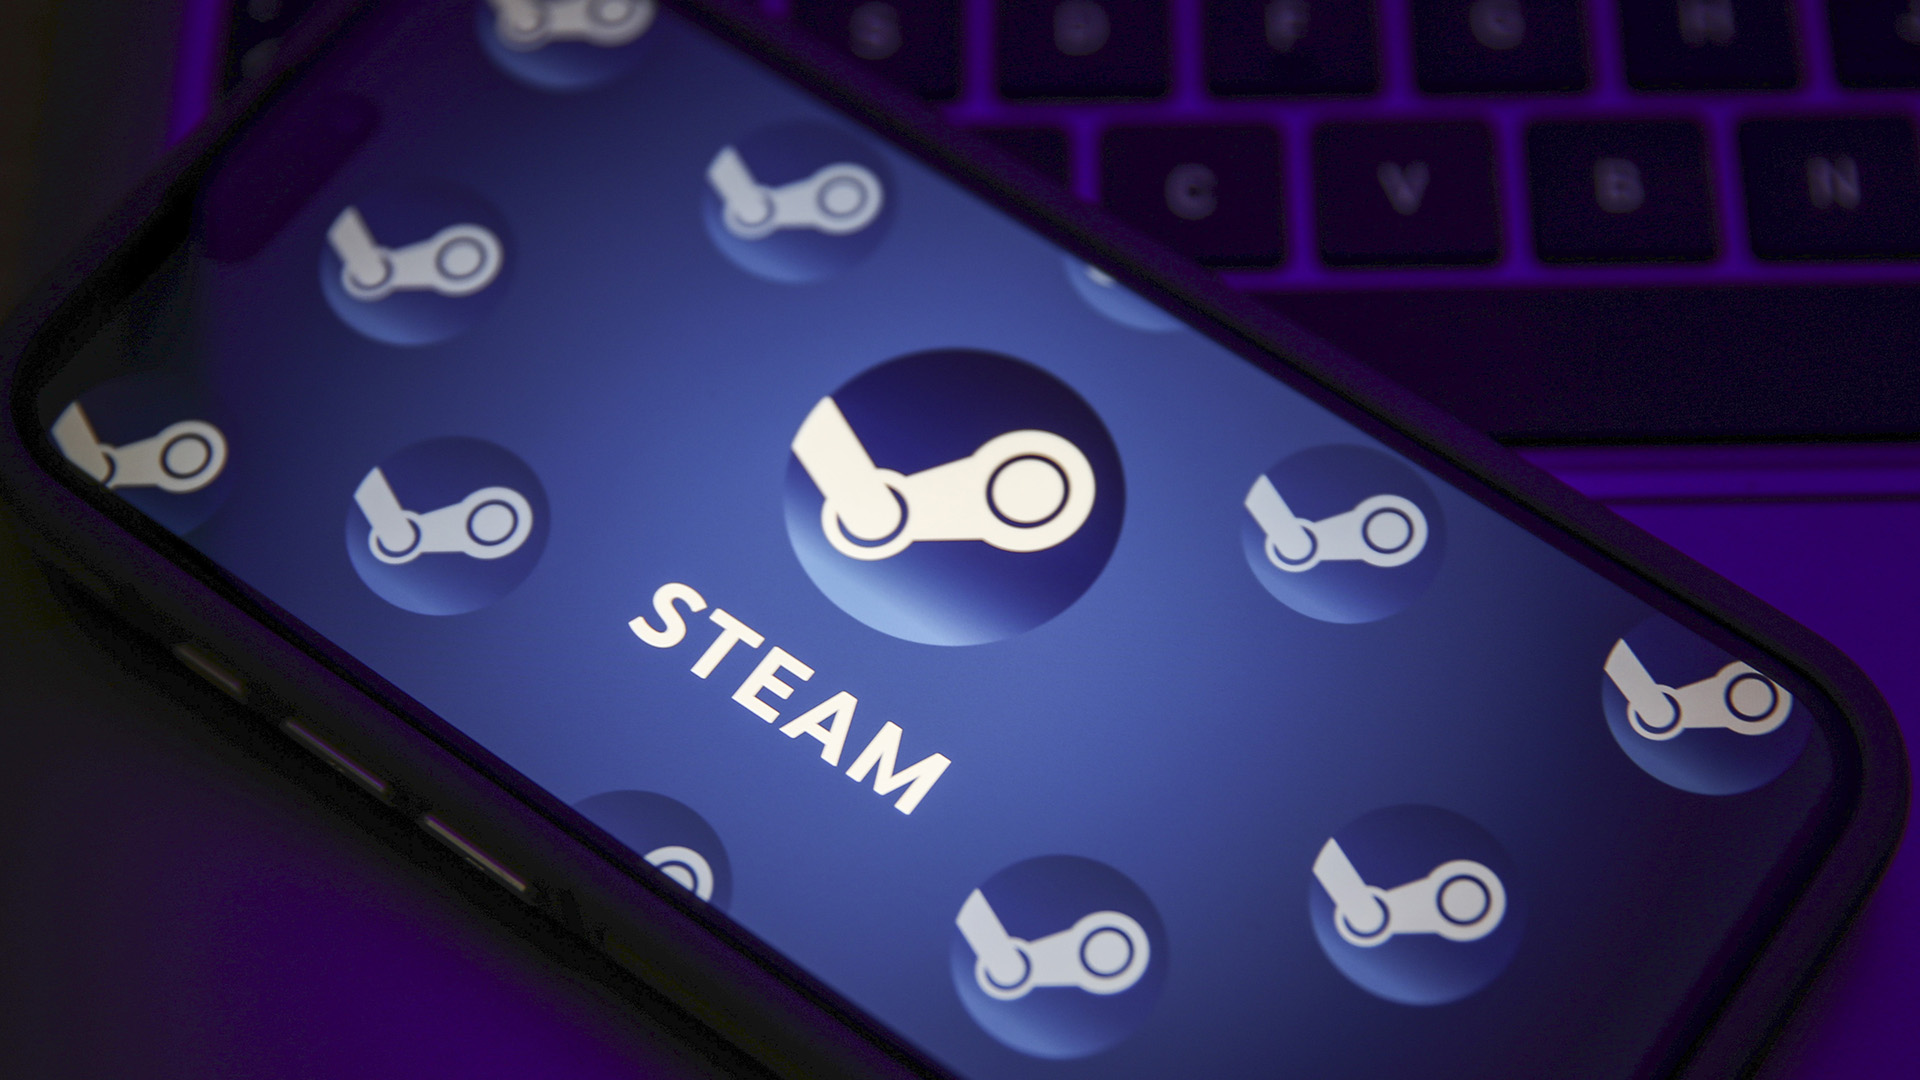 Steam Outage Wreaks Havoc: Thousands of Gamers Struggle to Access Platform Due to Server Issues